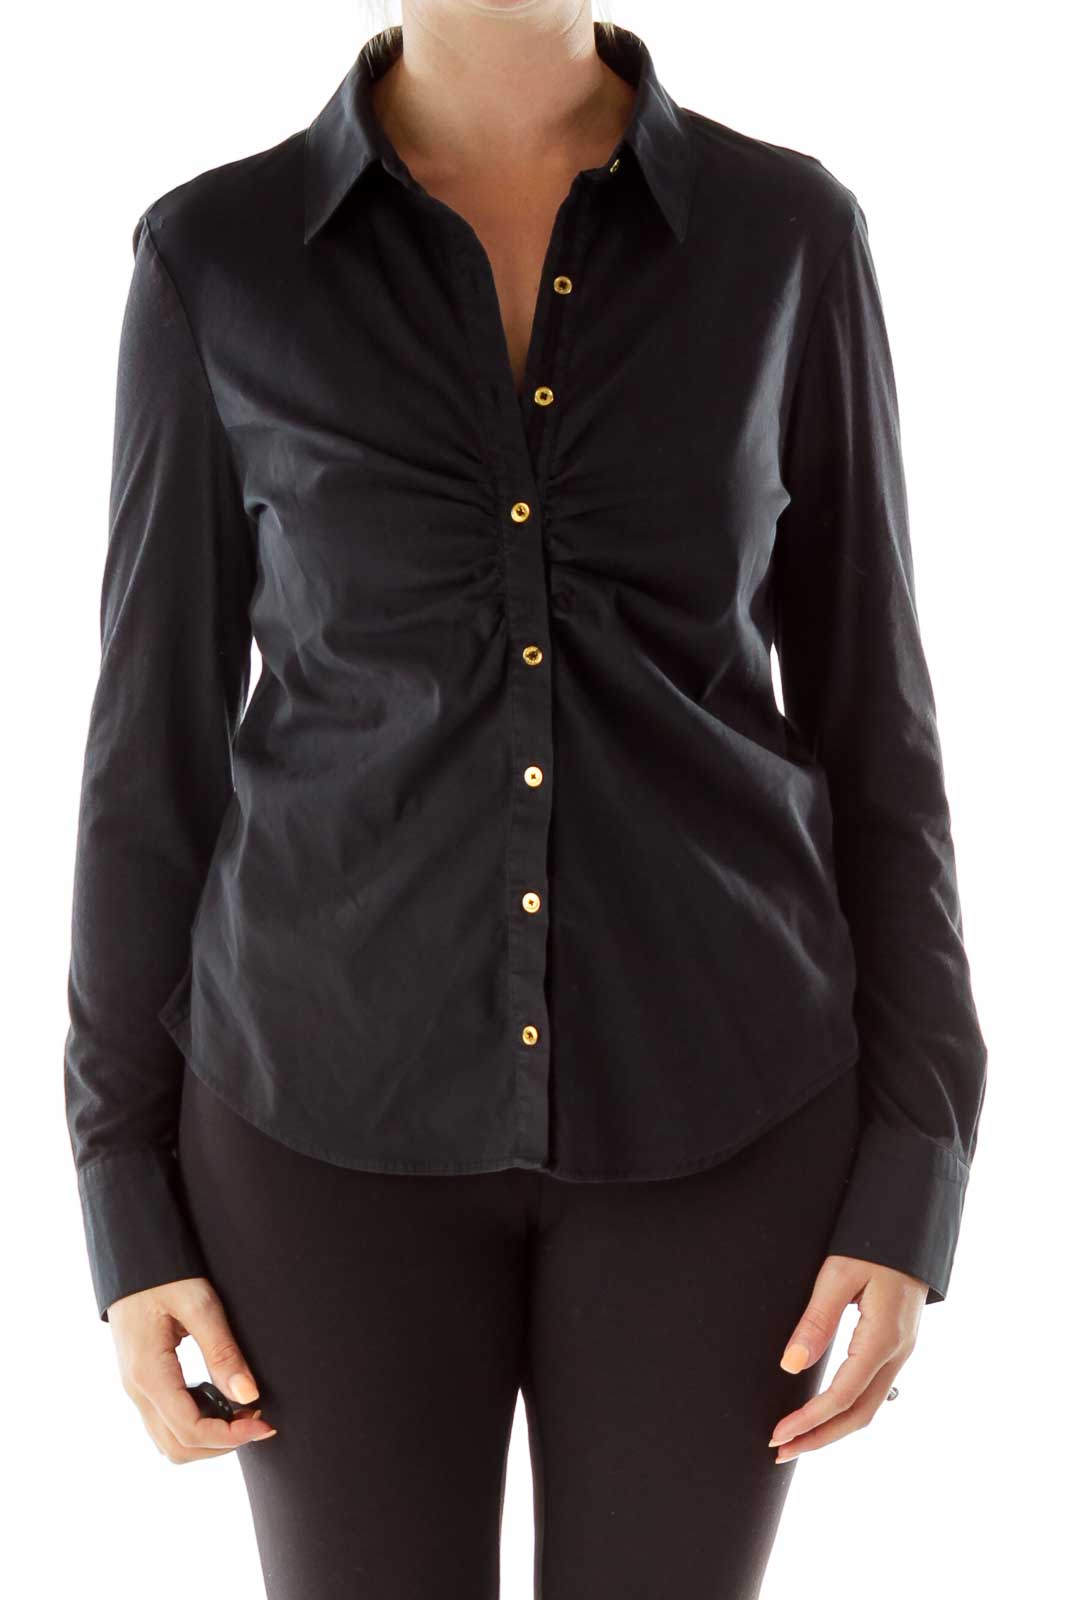 Black Collared Shirt Front